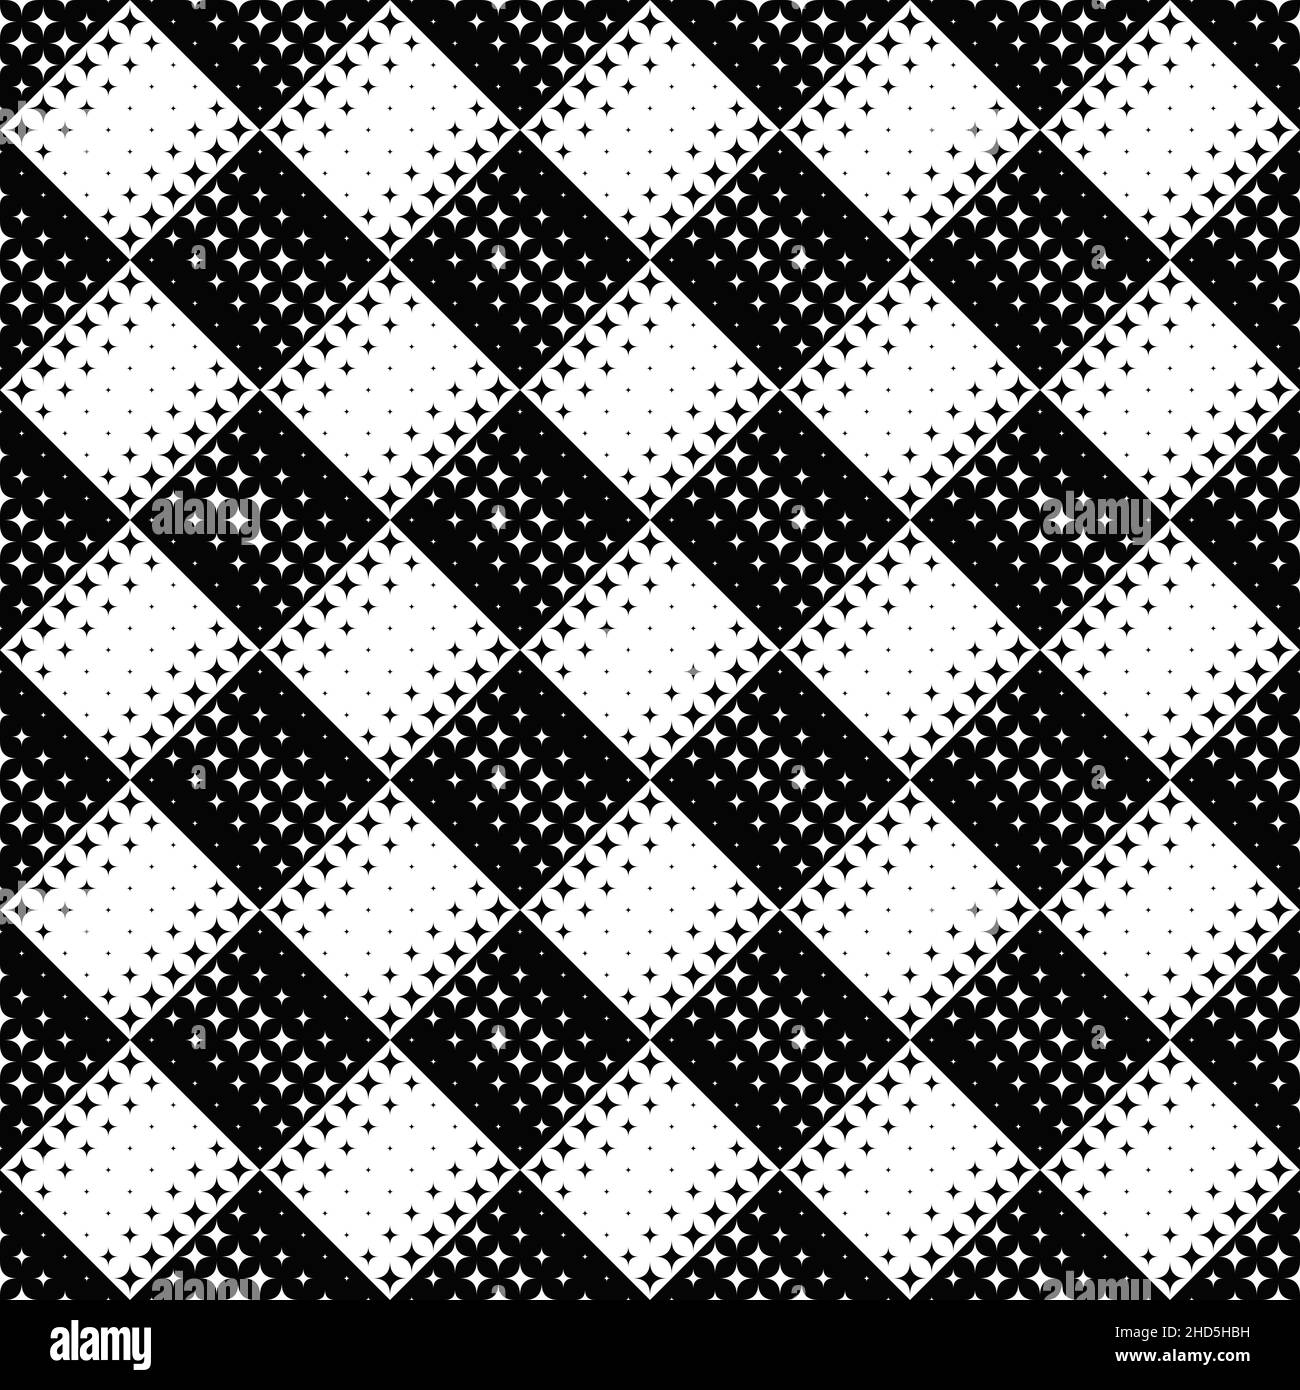 Abstract monochrome seamless star pattern background design Stock Vector